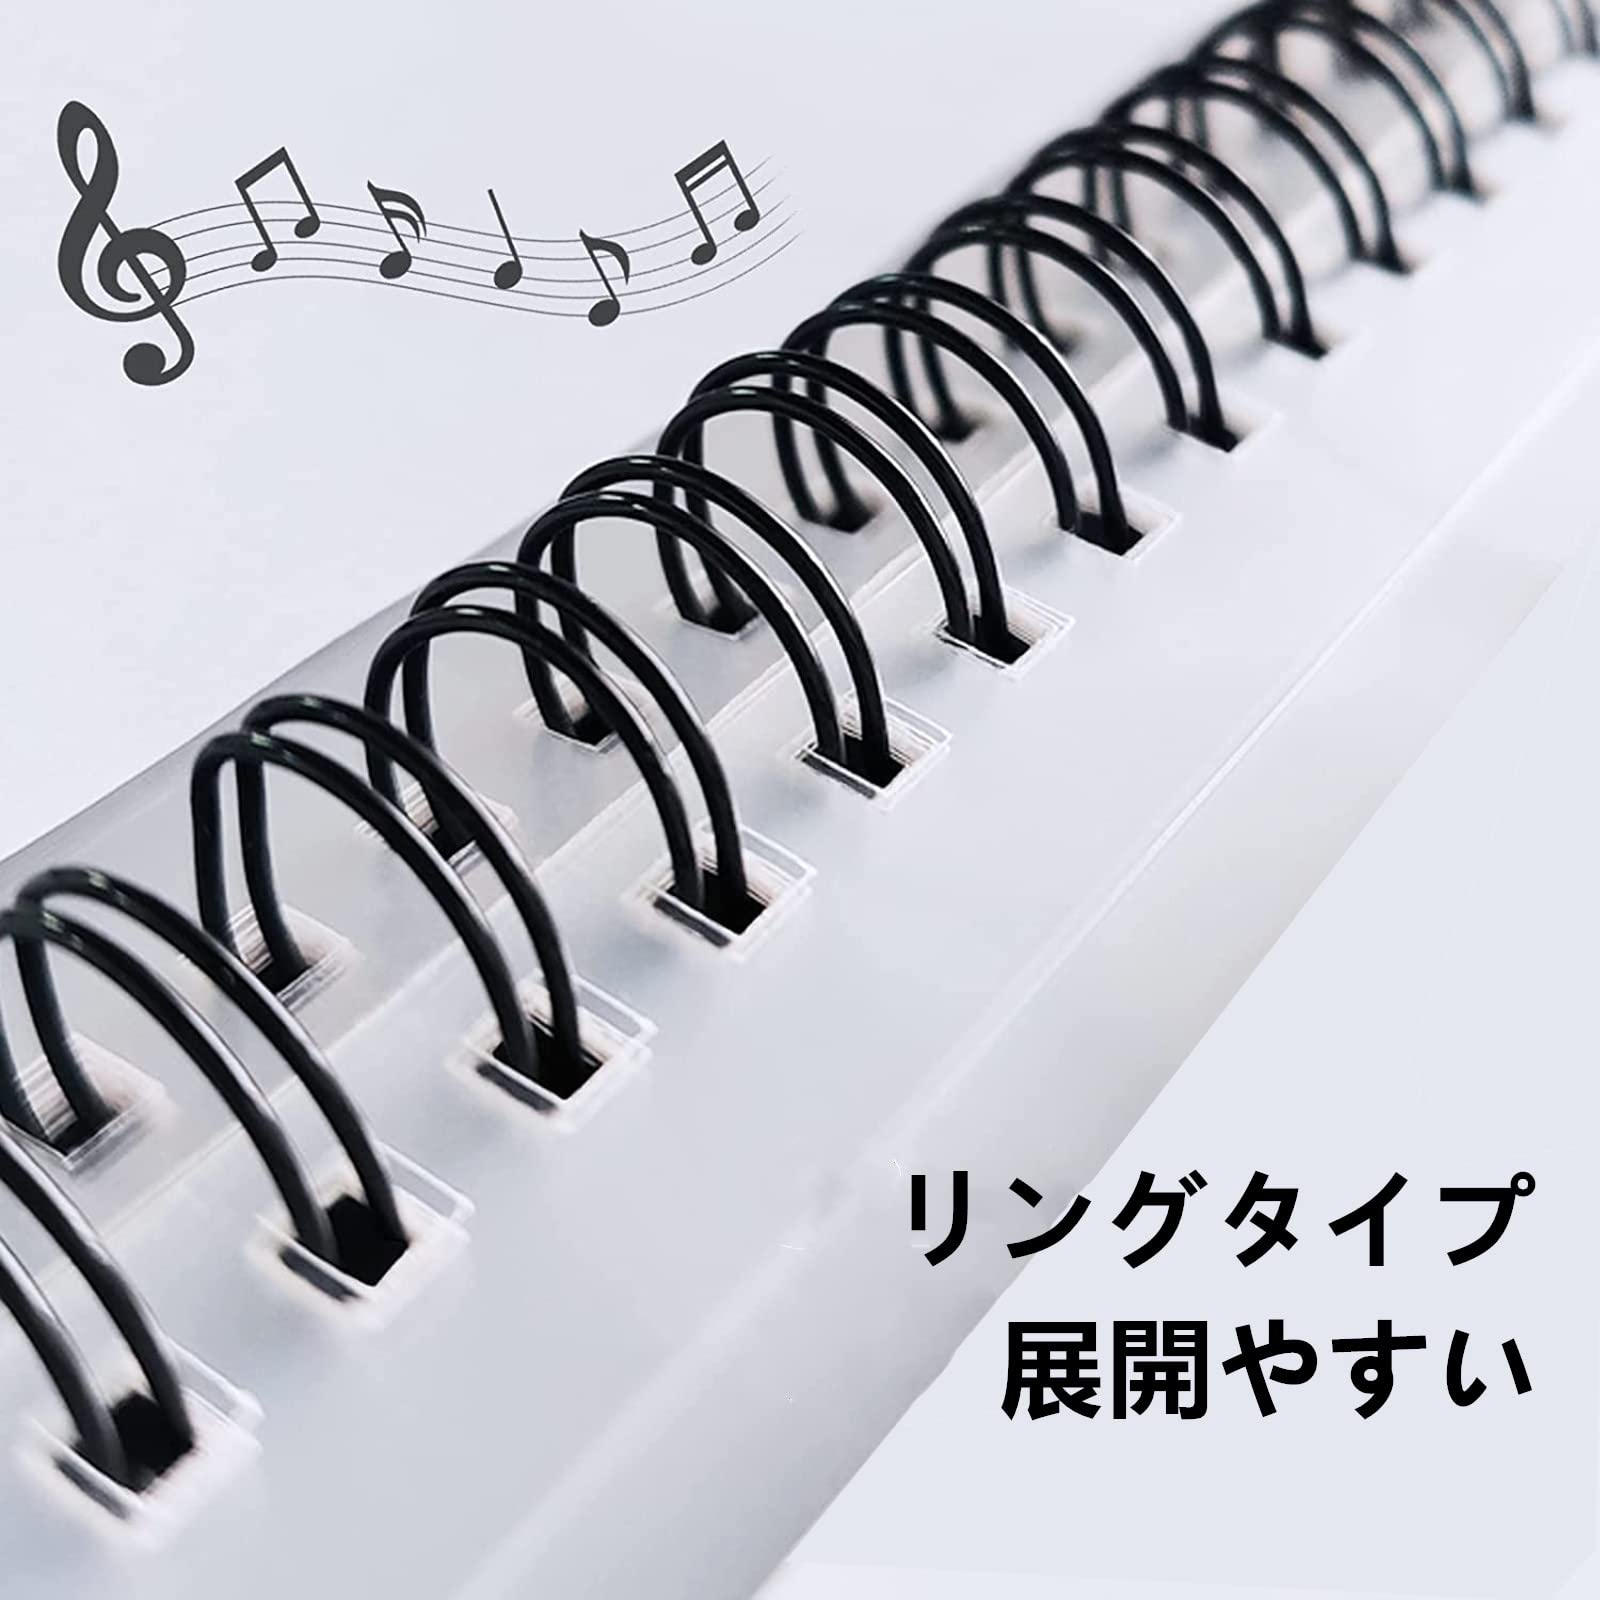  musical score file A4 size band file musical score inserting musical score holder plain black 2 surface 40 page direct paper . included .. design see opening wind instrumental music piano clear fa